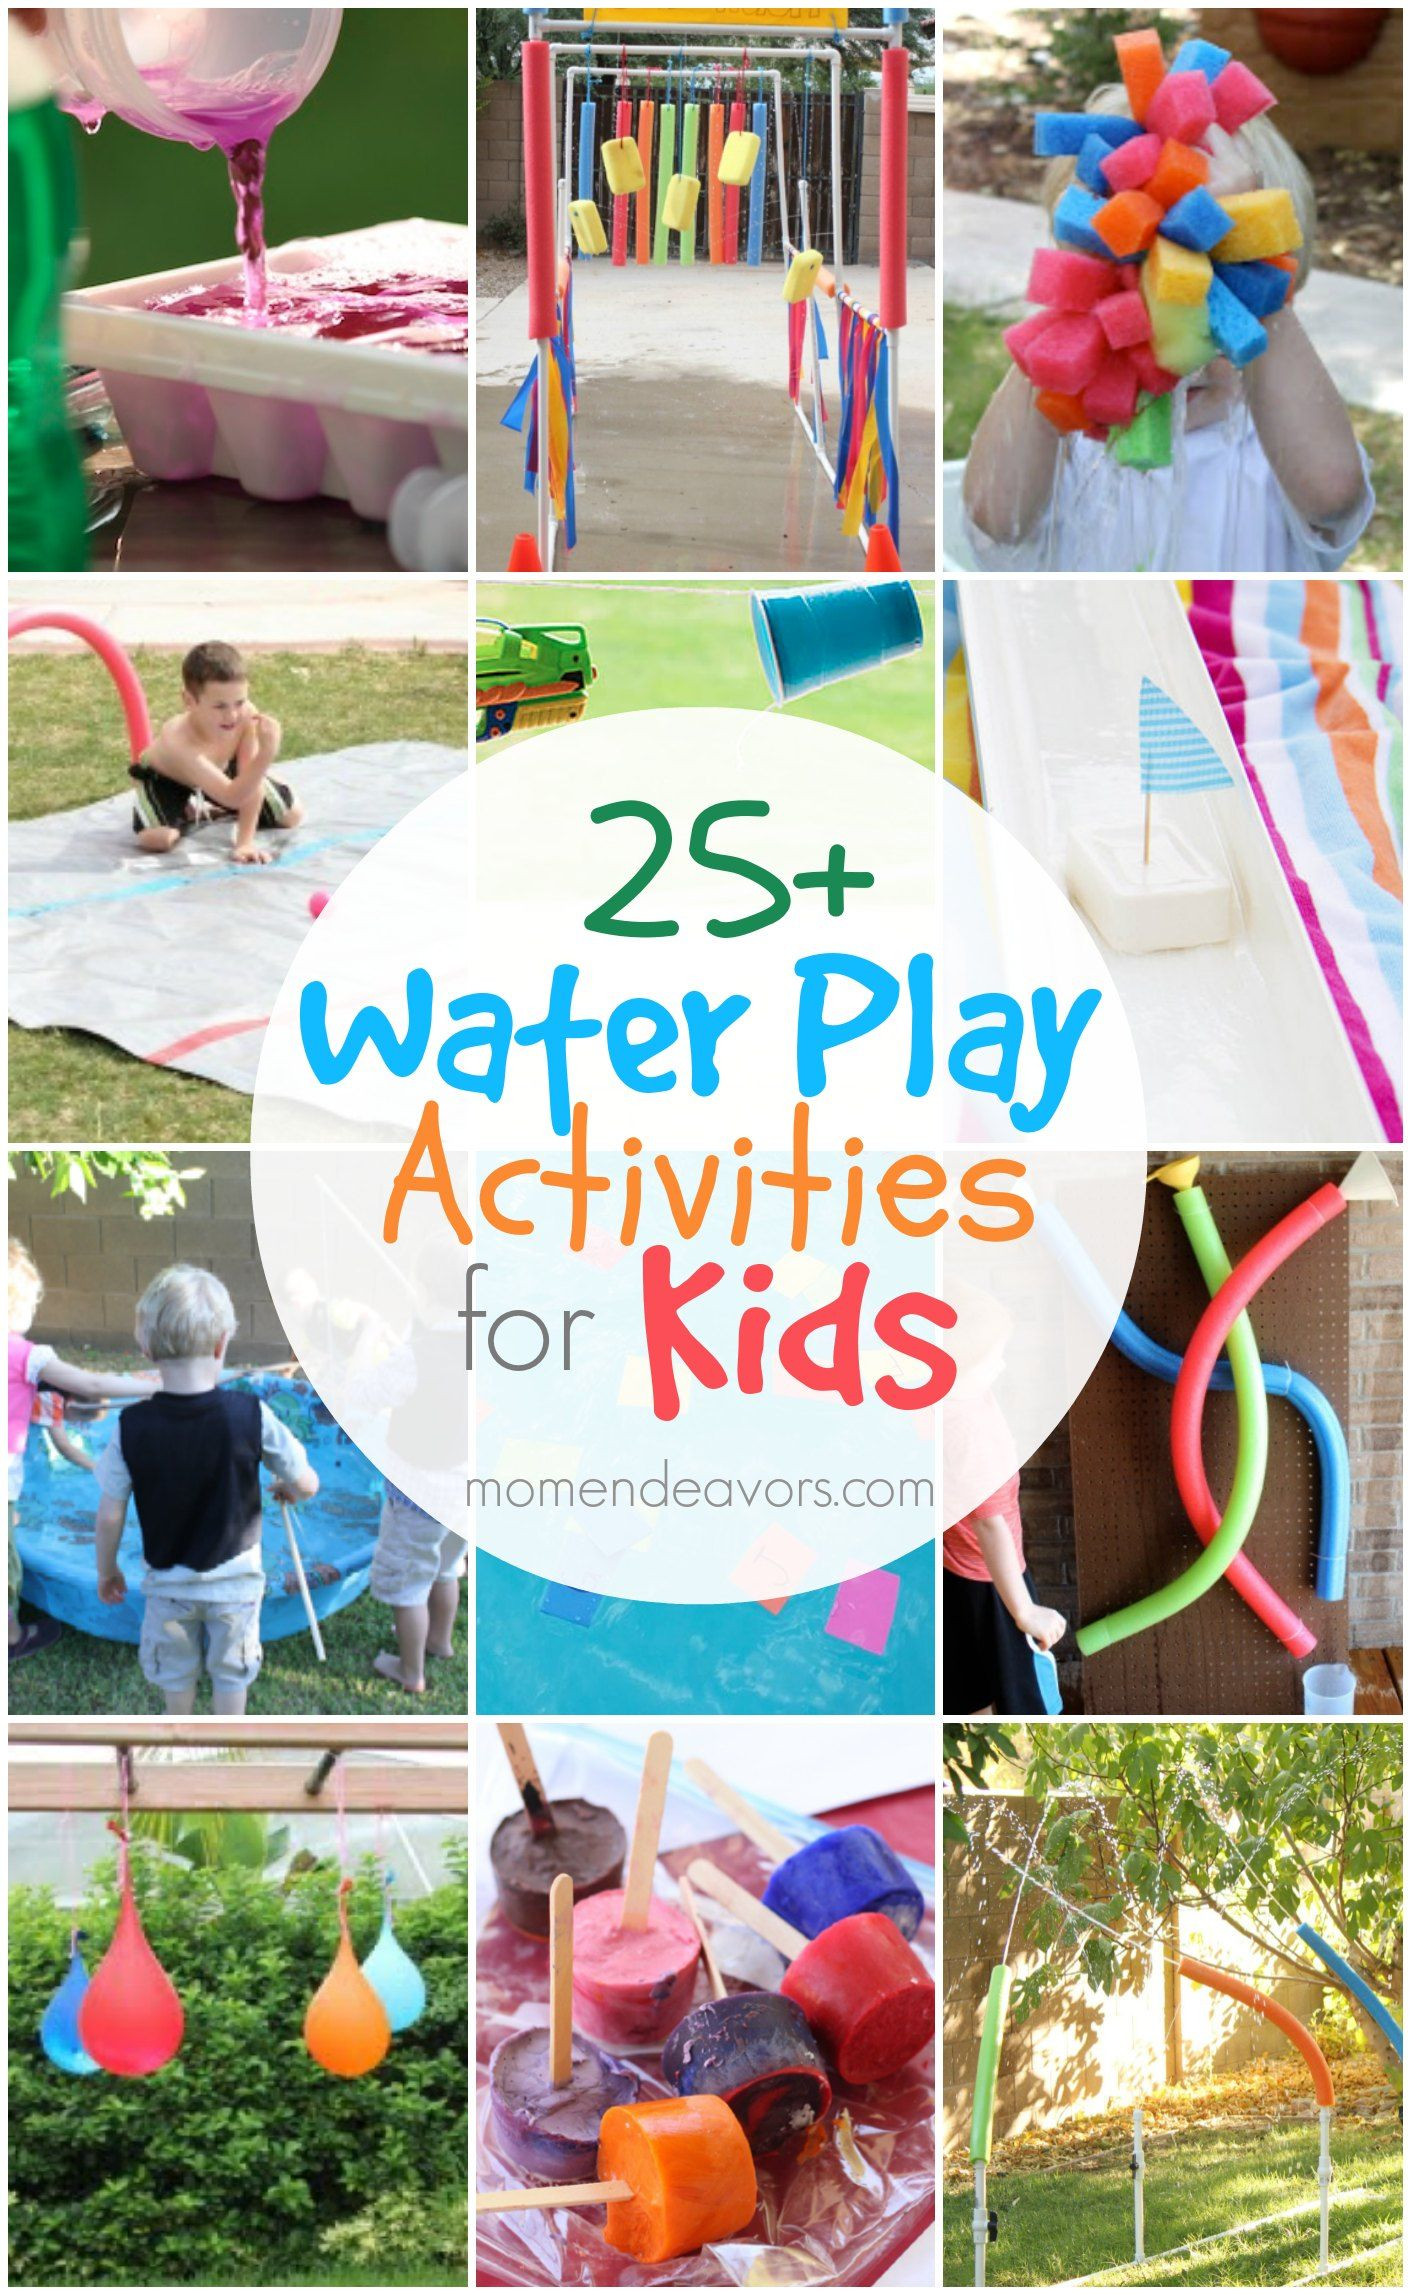 Ideas For Backyard Water Party
 25 Outdoor Water Play Activities for Kids so many fun